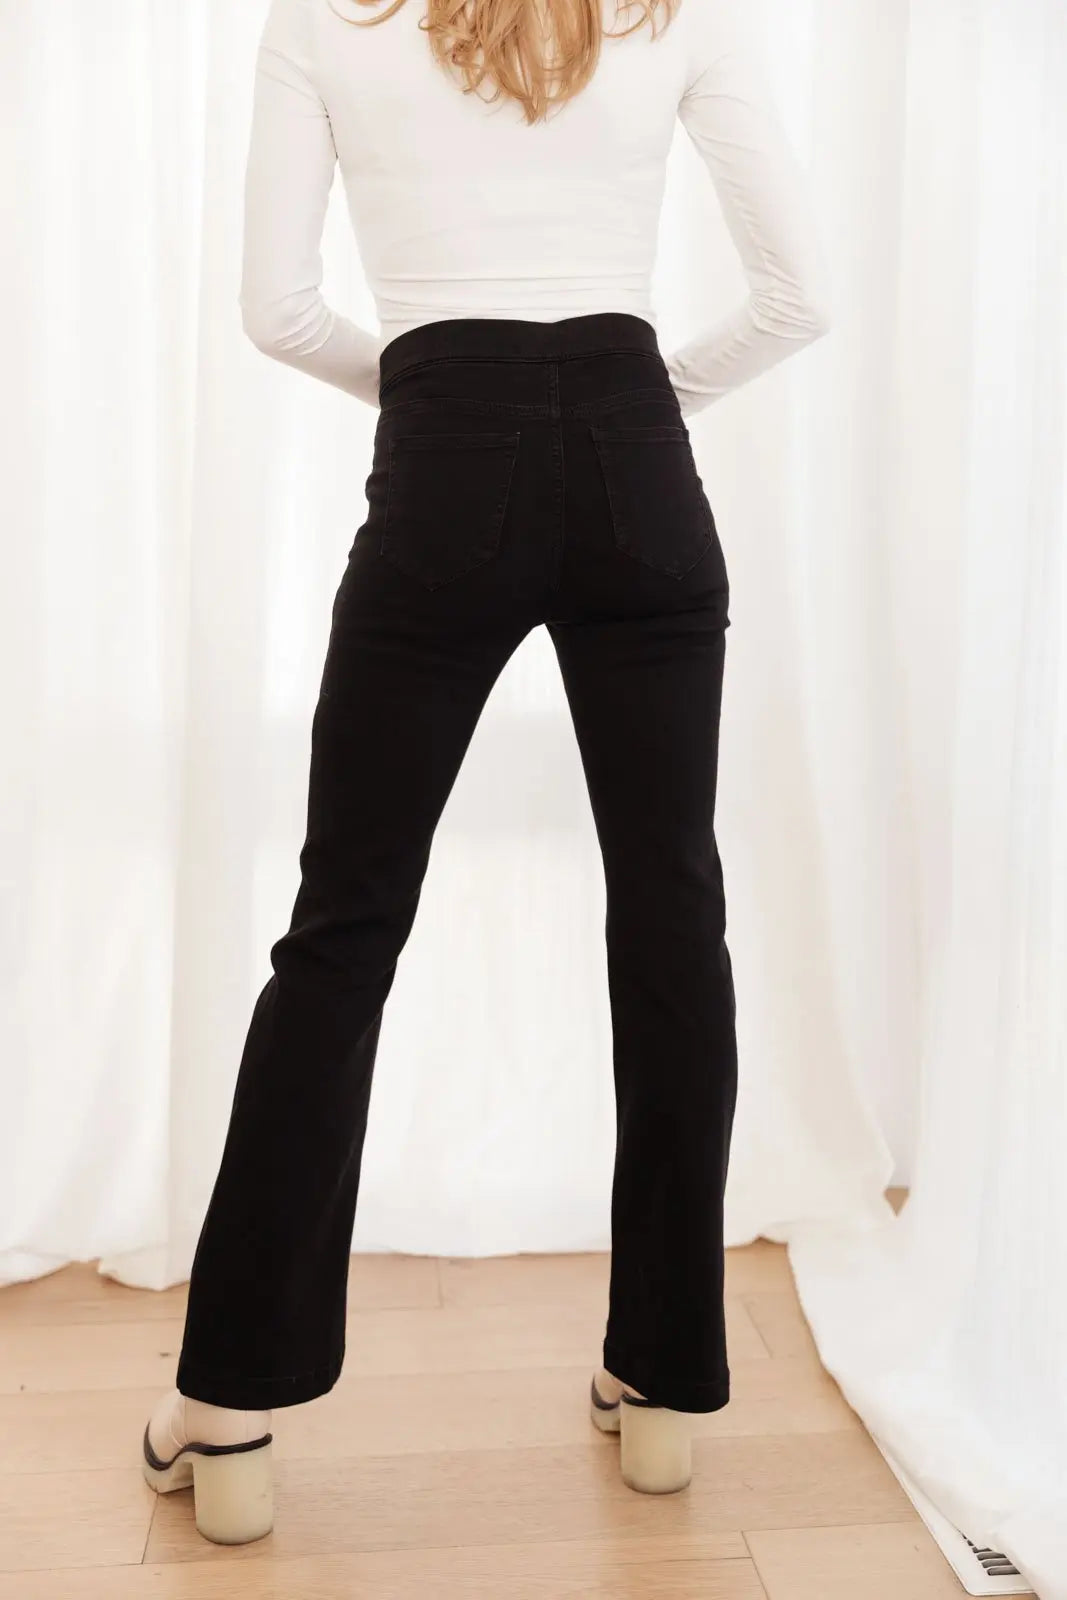 Next Level Black Flare Jeans Womens Southern Soul Collectives 